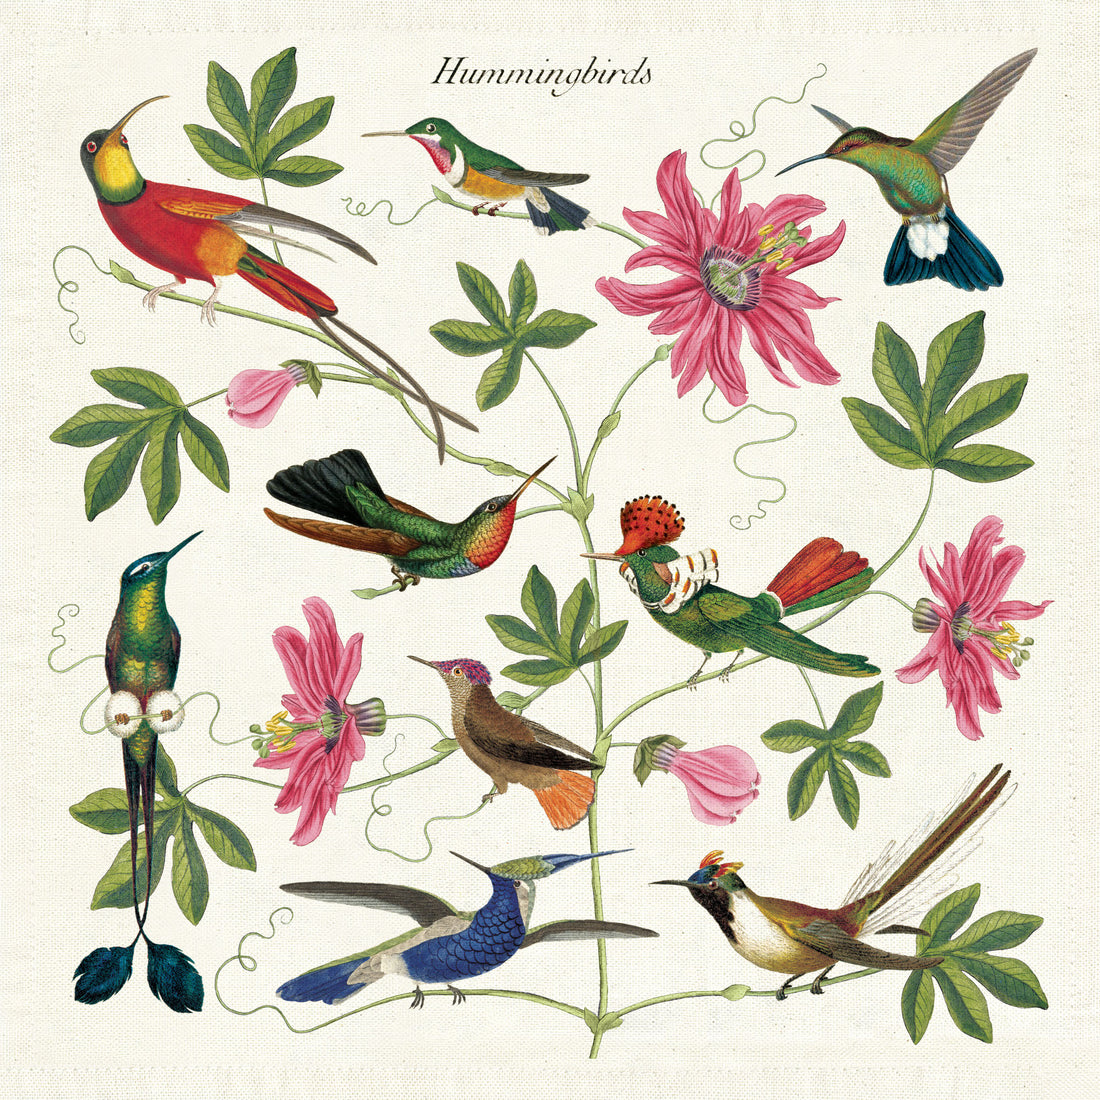 Illustration of various species of hummingbirds with floral elements from the Cavallini Papers &amp; Co archives, designed as a jigsaw puzzle.